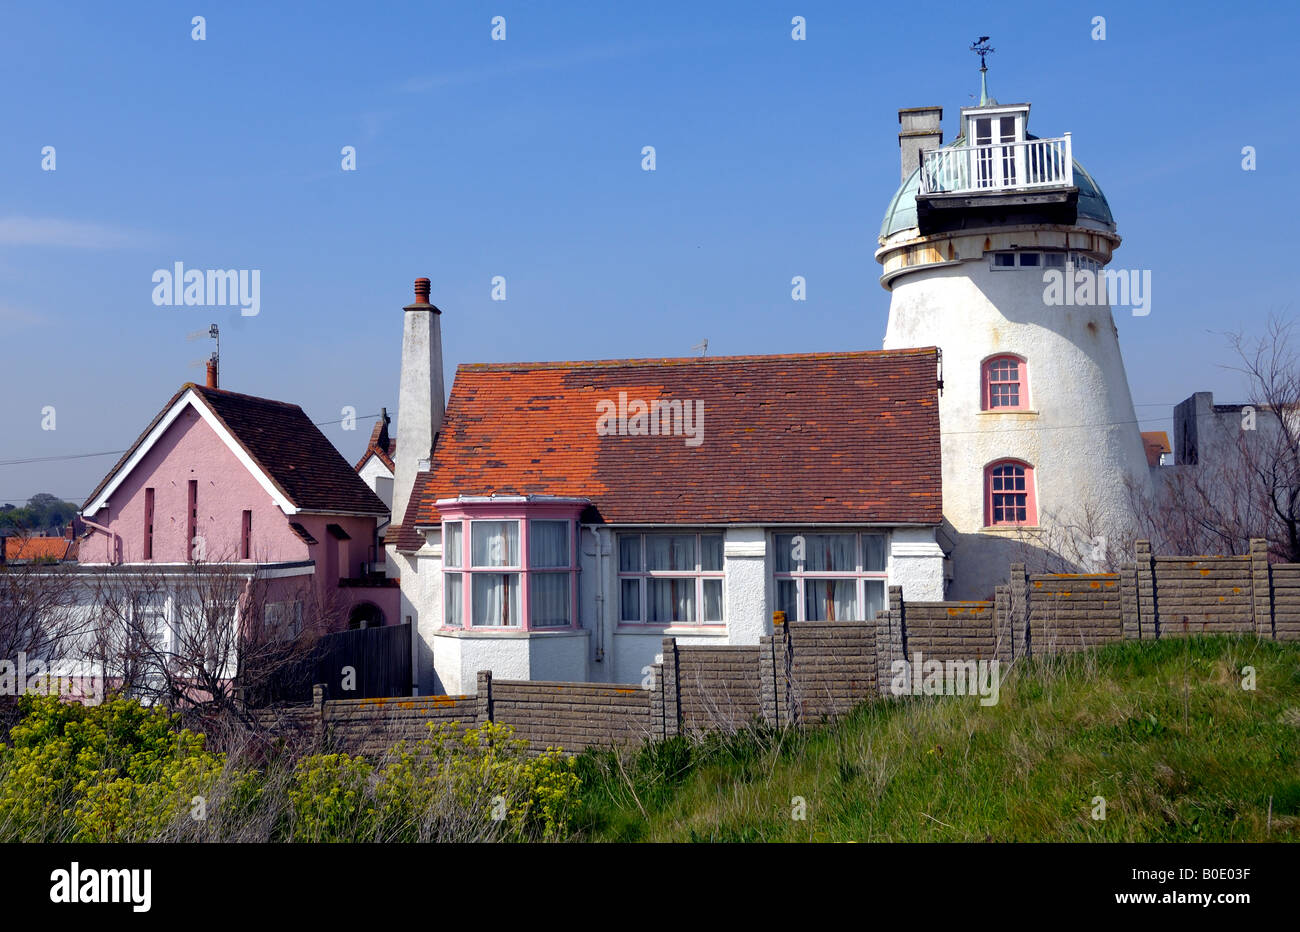 View Of Unusual House, Aldeburgh, Suffolk Stock Photo